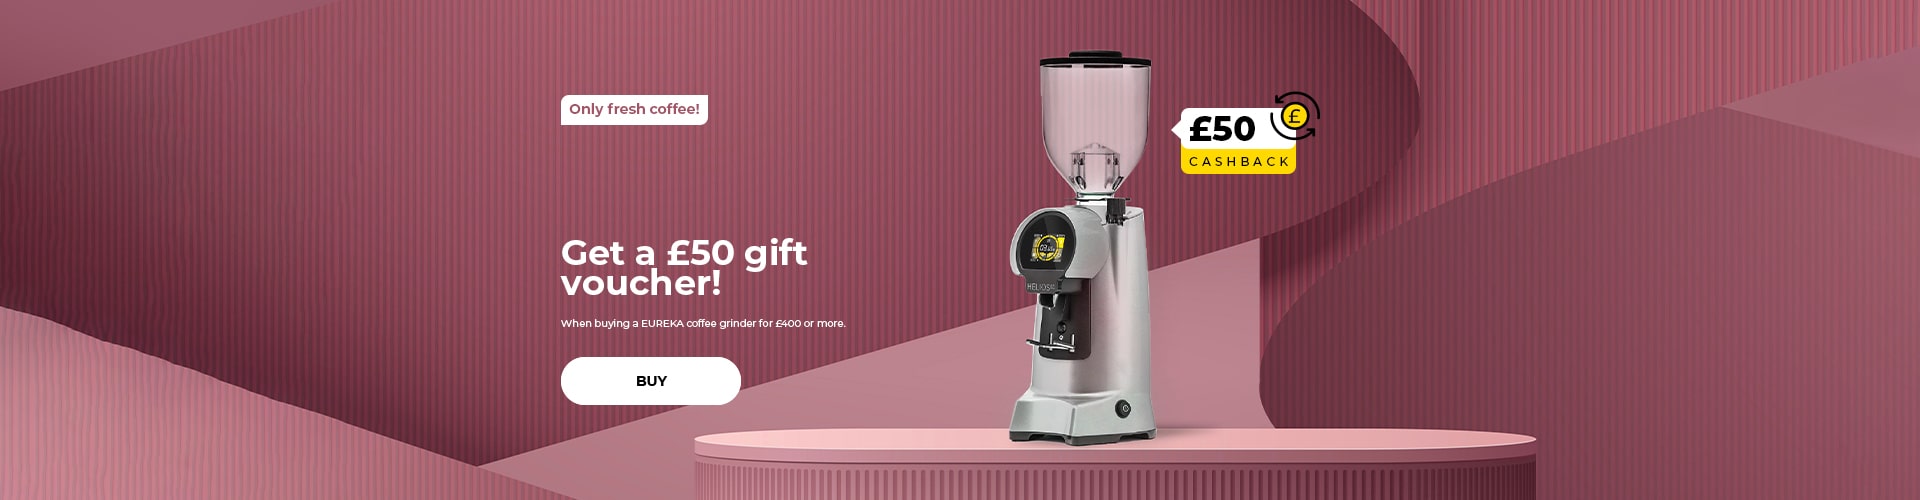 "Get a 50 € gift voucher! When buying a EUREKA coffee grinder for 400 € or more."